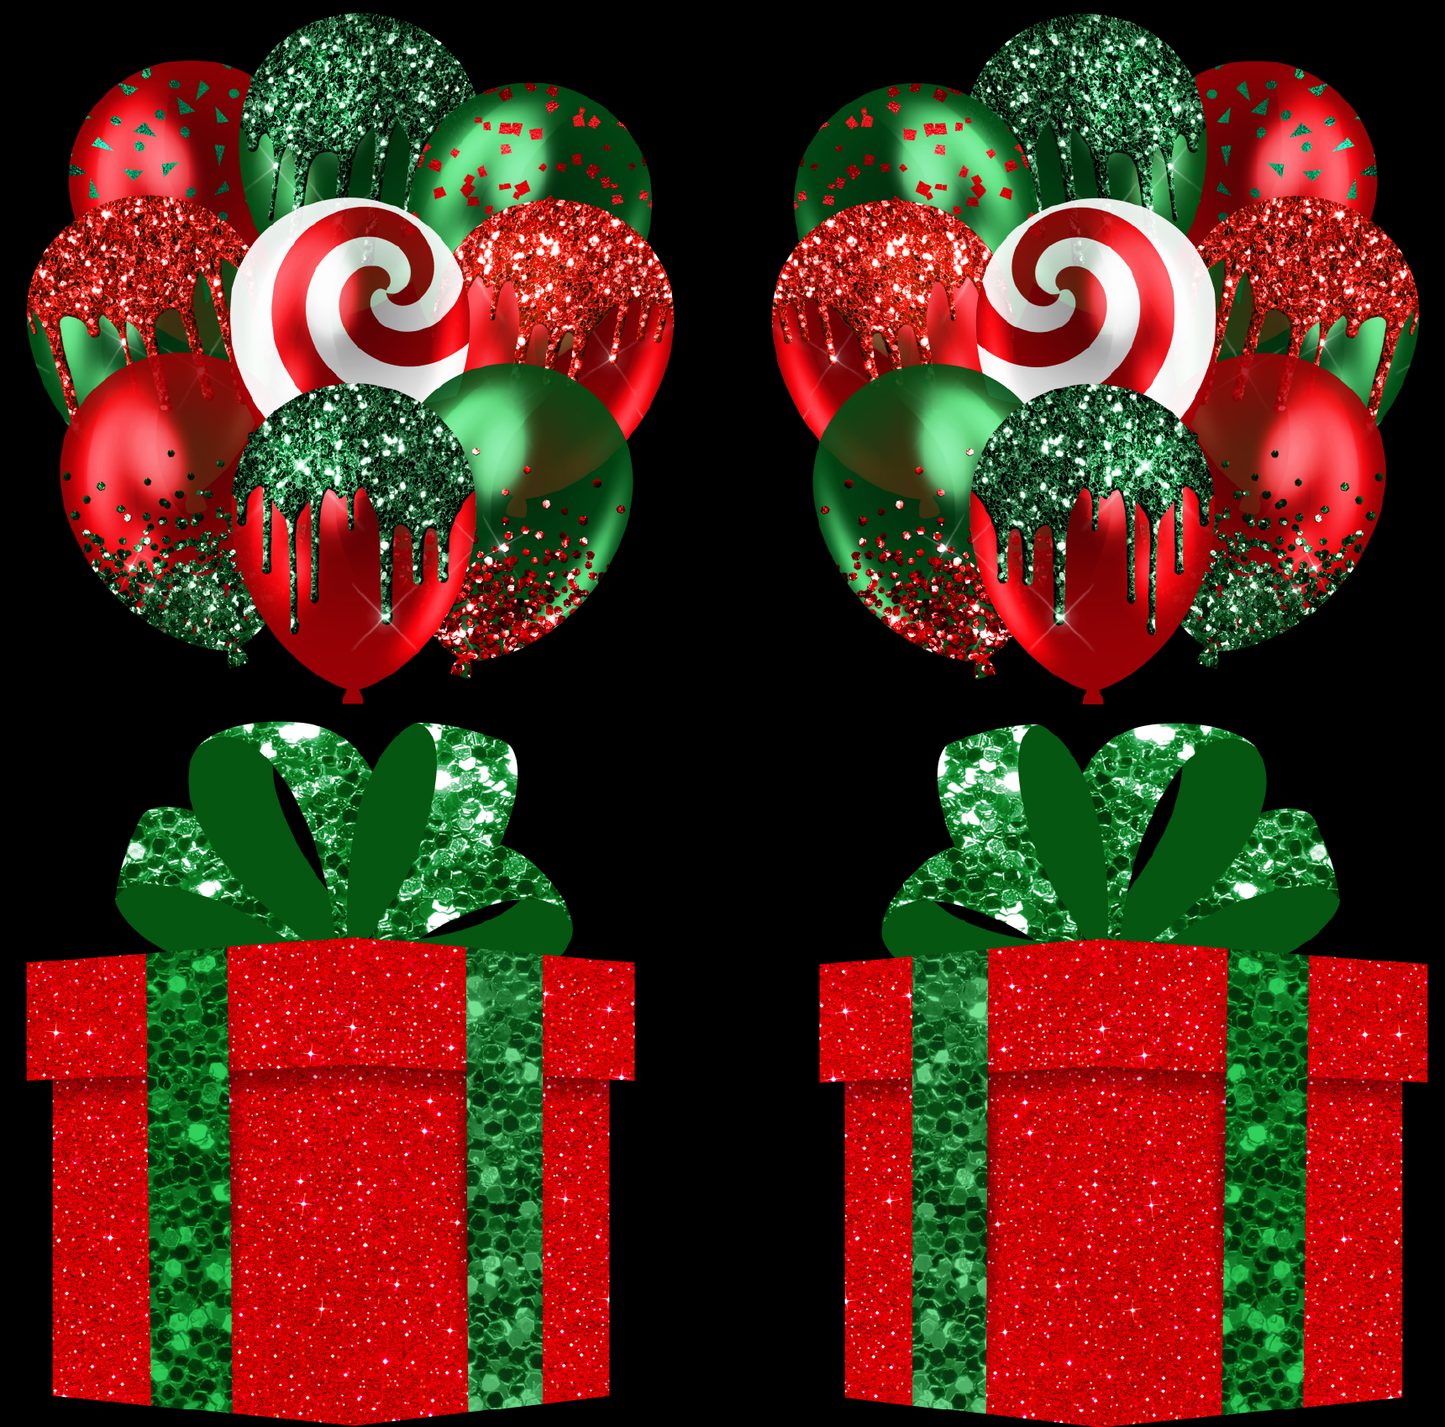 Red and Green Christmas Balloons and Presents Set 2 Half Sheet  (Must Purchase 2 Half sheets - You Can Mix & Match)